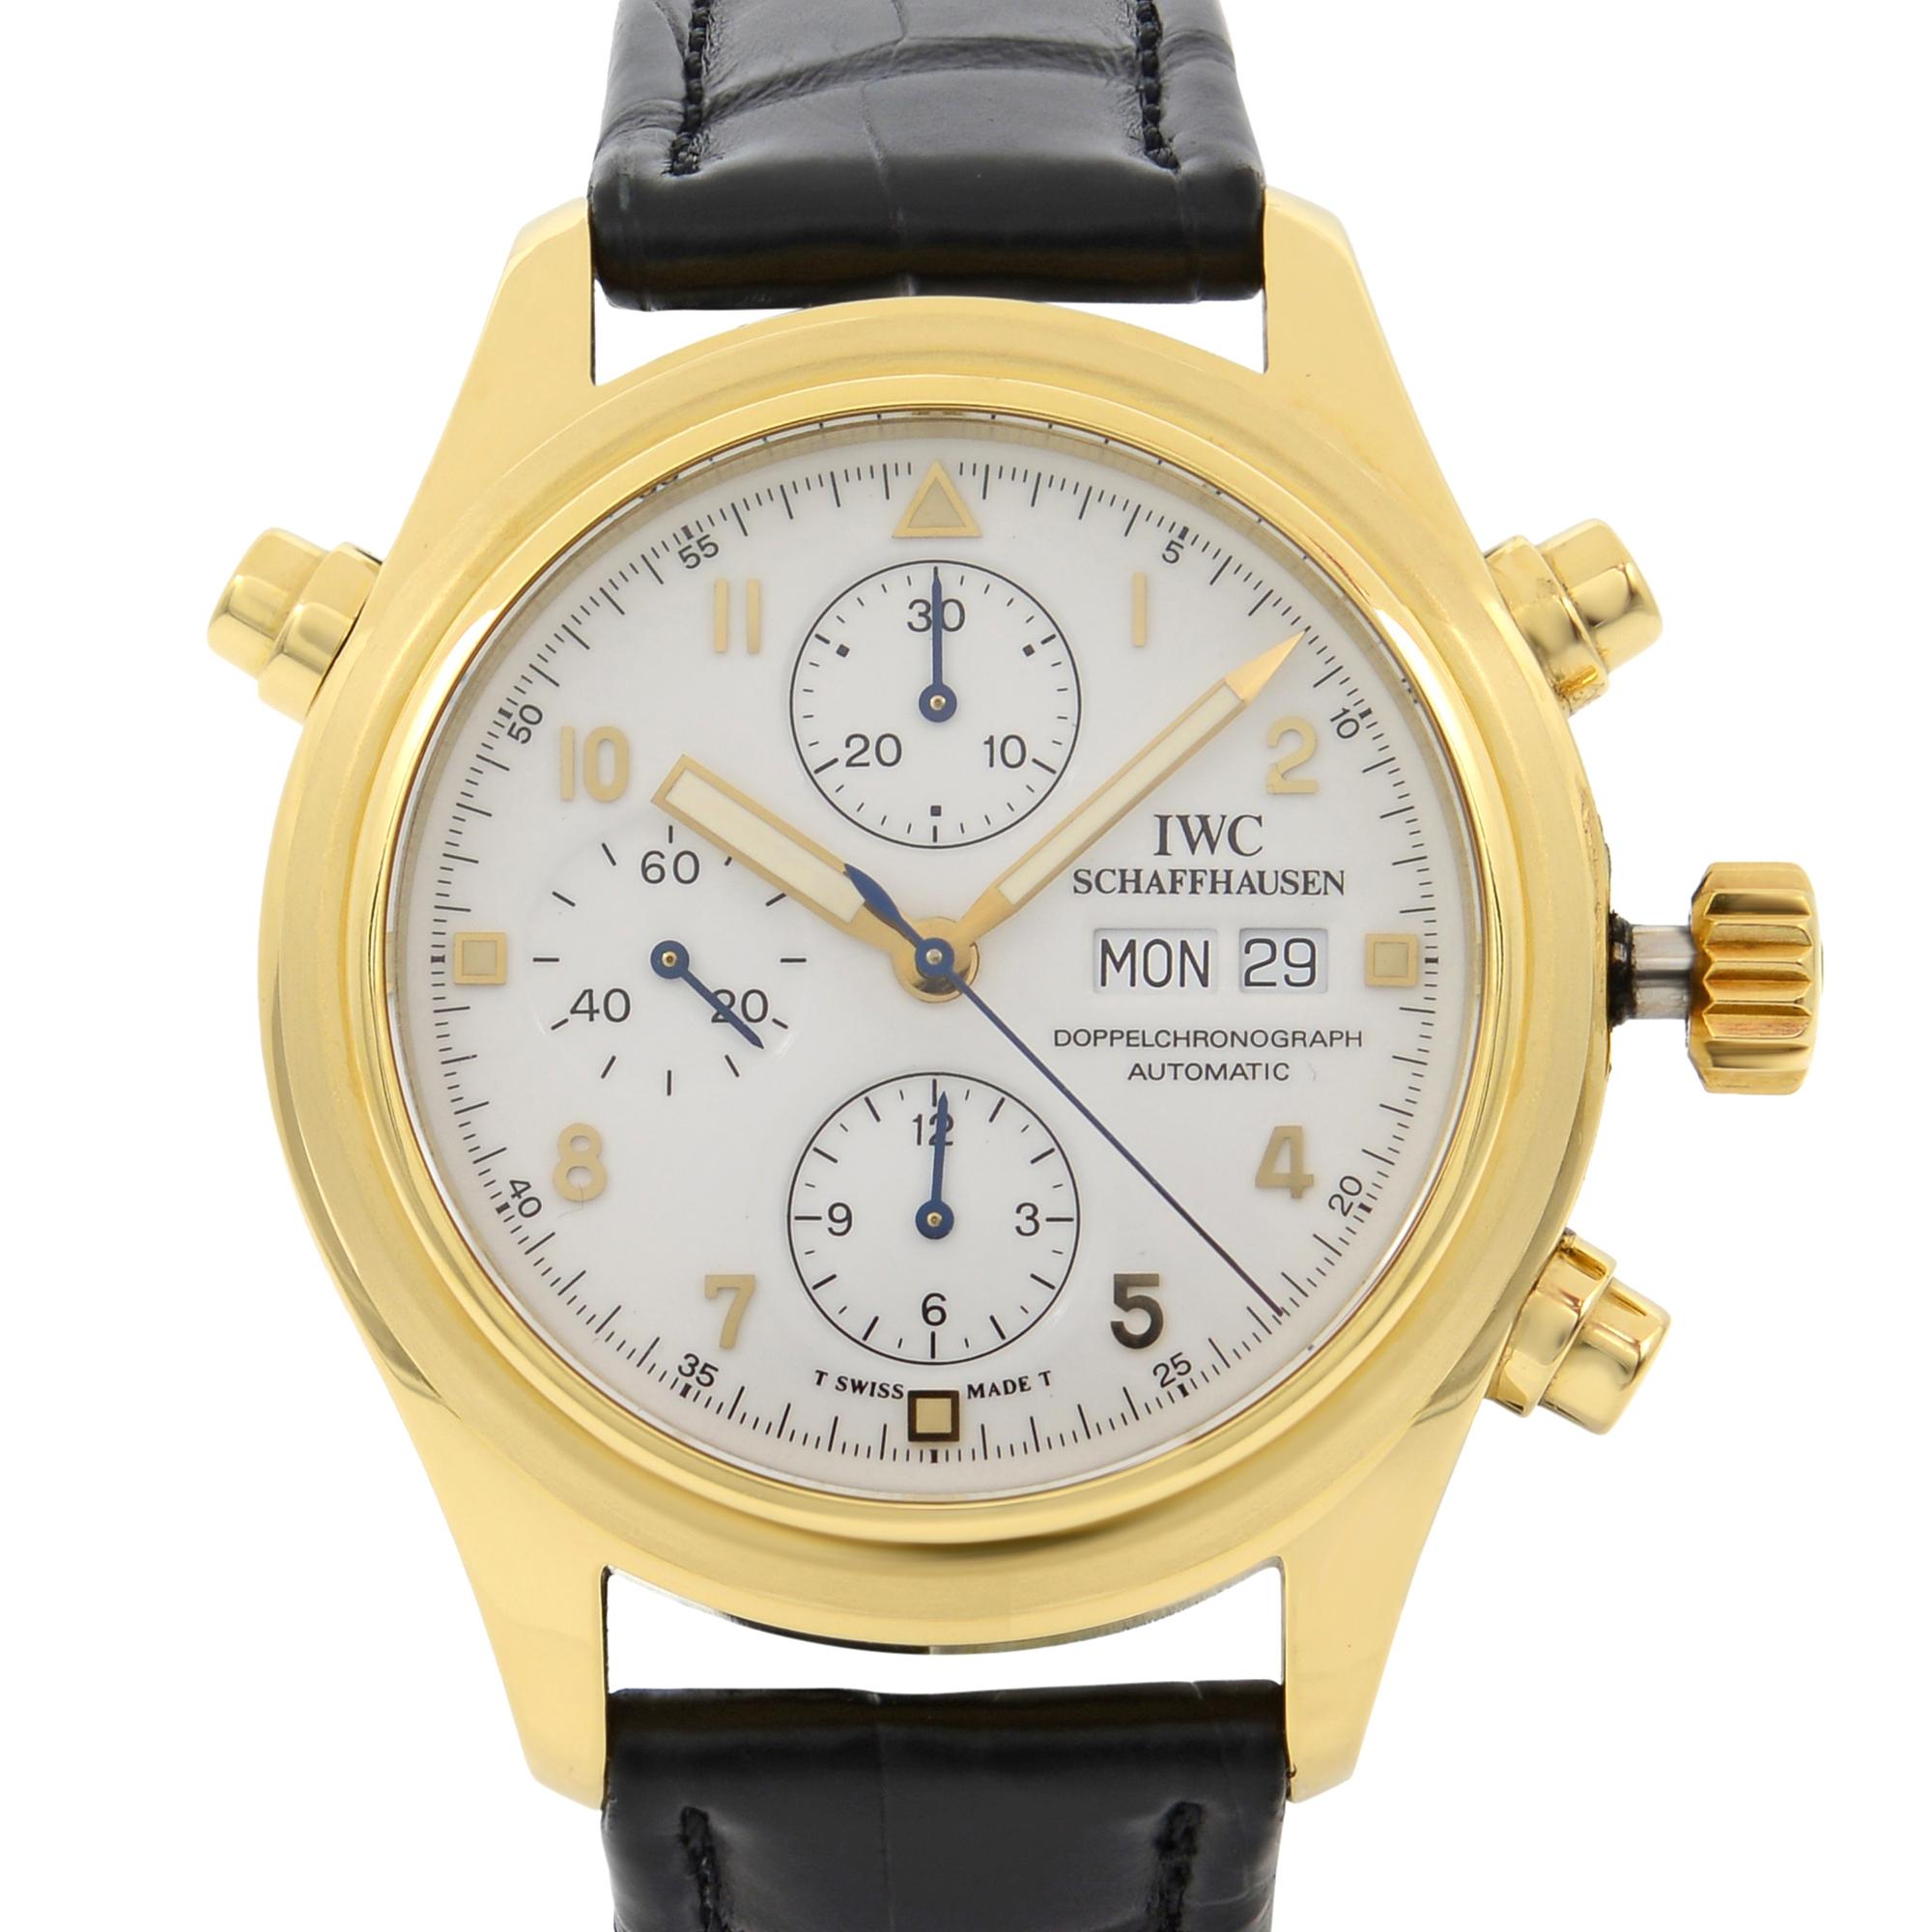 This pre-owned IWC Pilot's IW3711-11  is a beautiful men's timepiece that is powered by mechanical (automatic) movement which is cased in a yellow gold case. It has a round shape face, annual calendar, chronograph, date indicator, small seconds